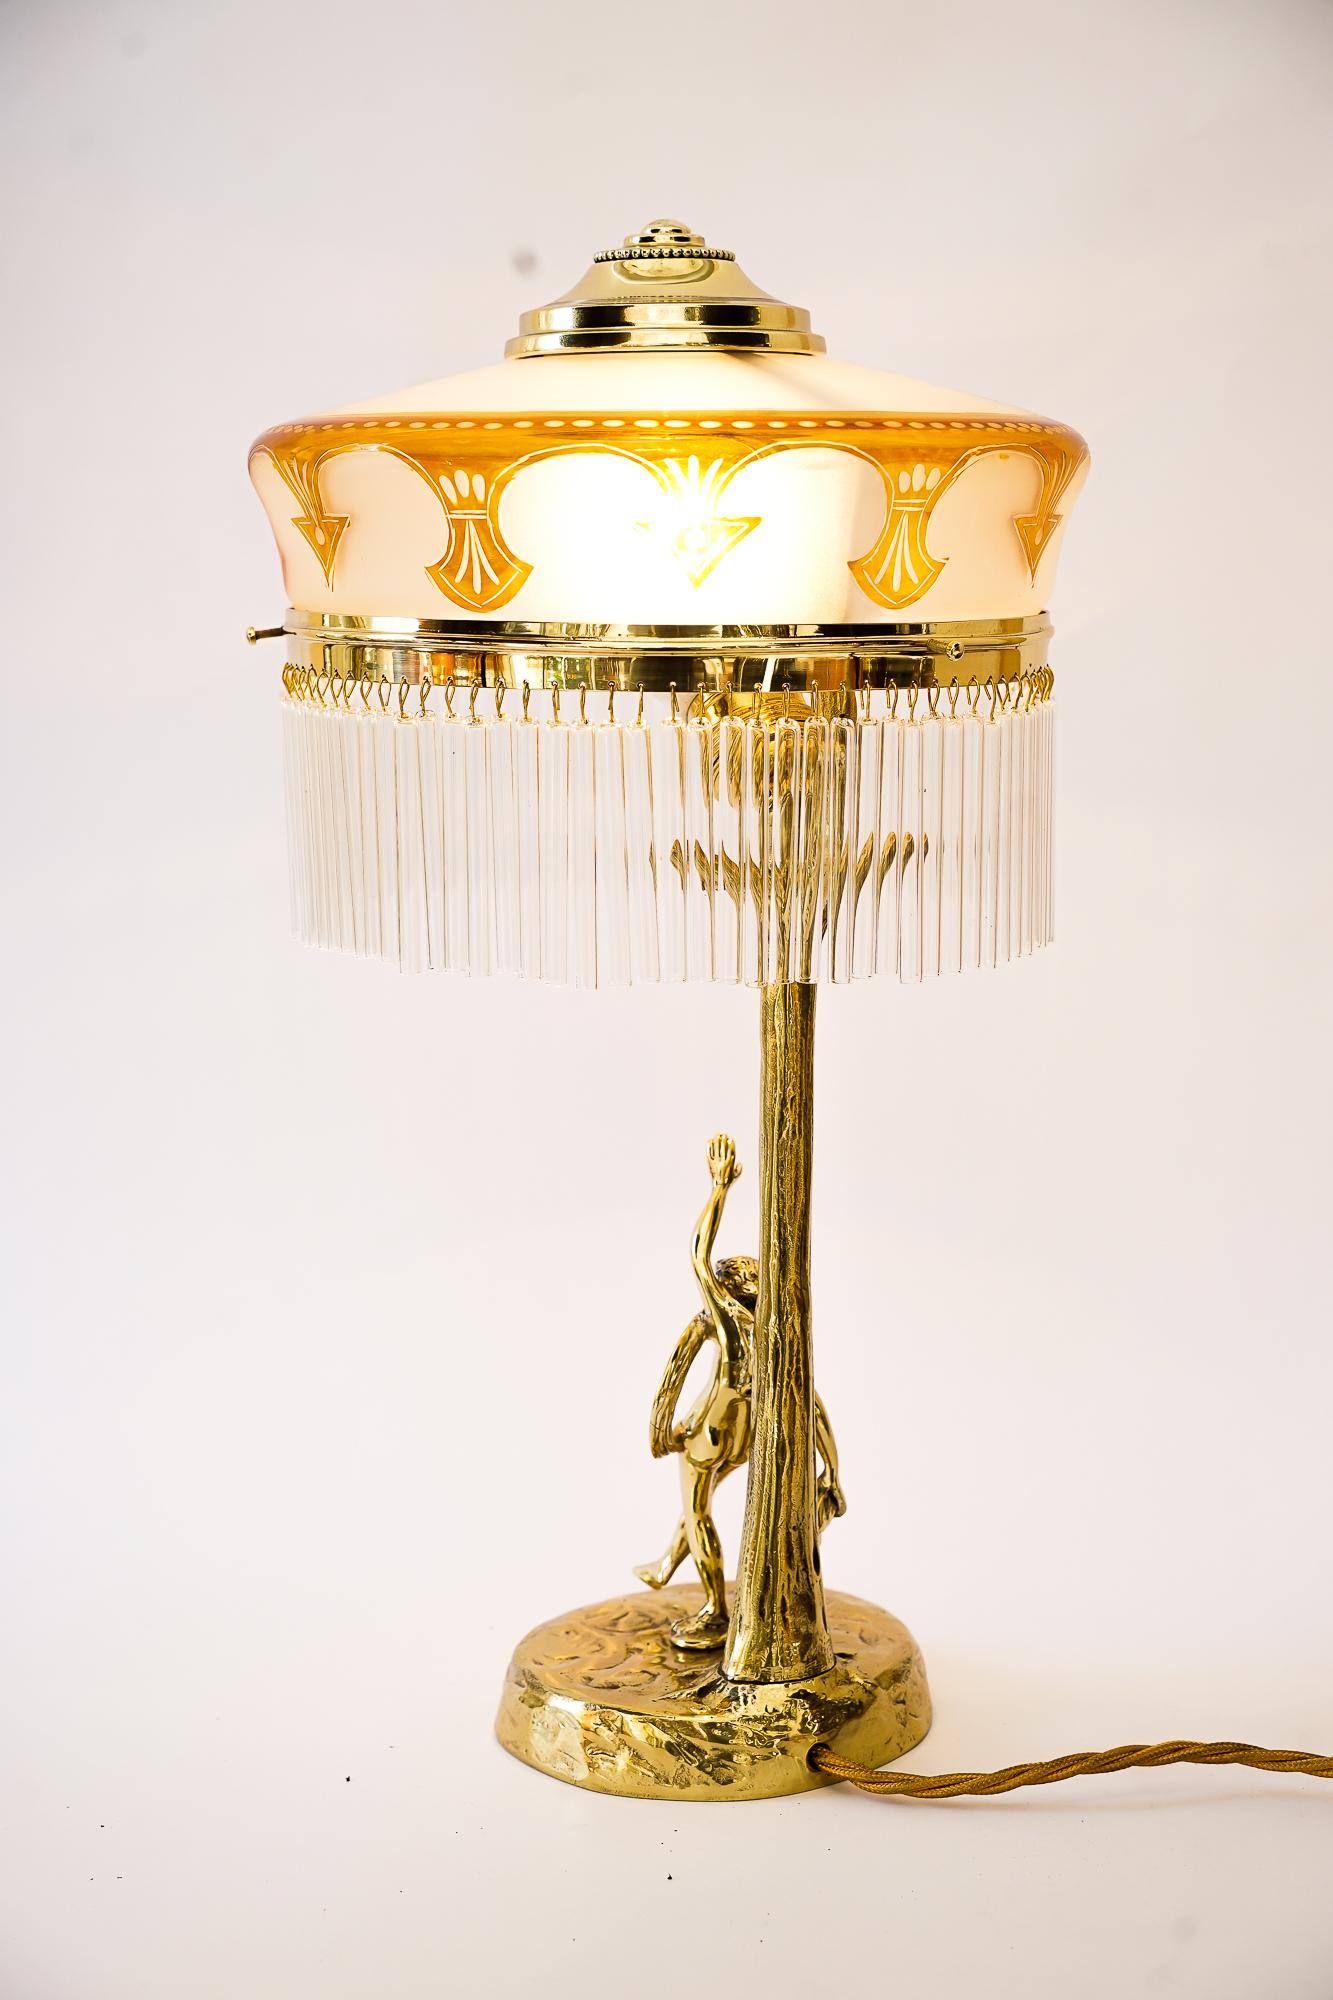 Jugendstil Table Lamp with Original Antique Glass Shade, Vienna, Around 1910s For Sale 12